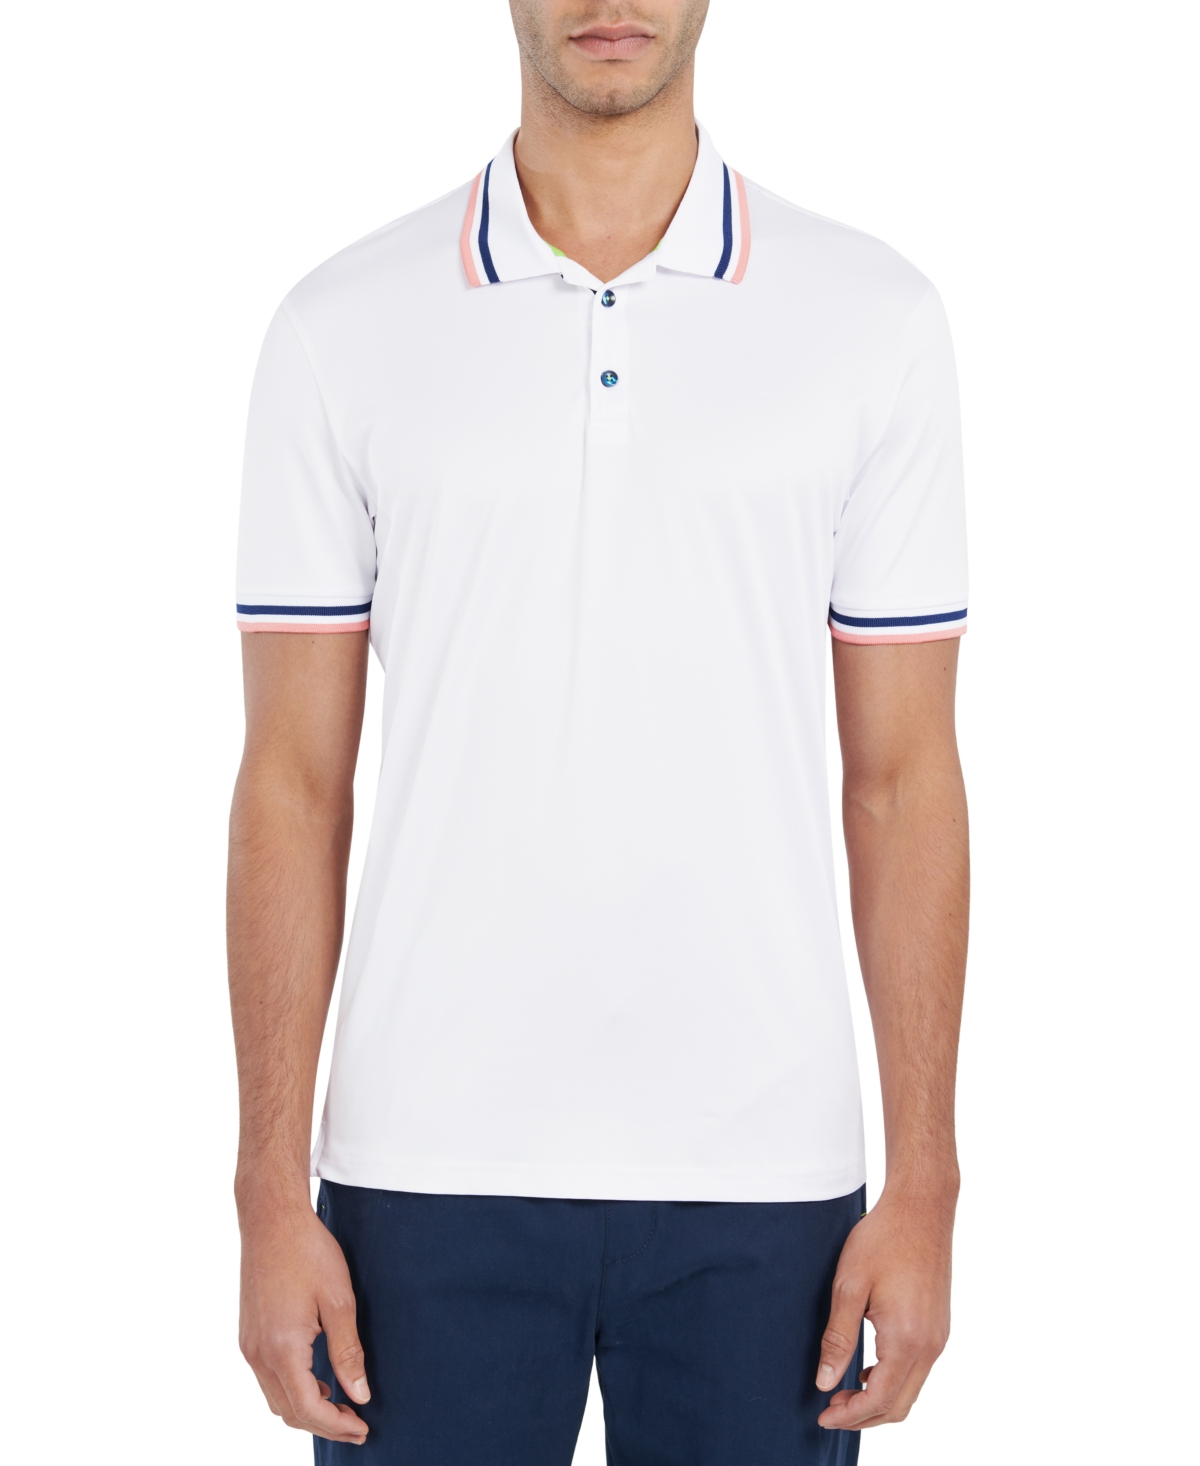 Men's Slim Fit Solid Tipped Performance Polo - White